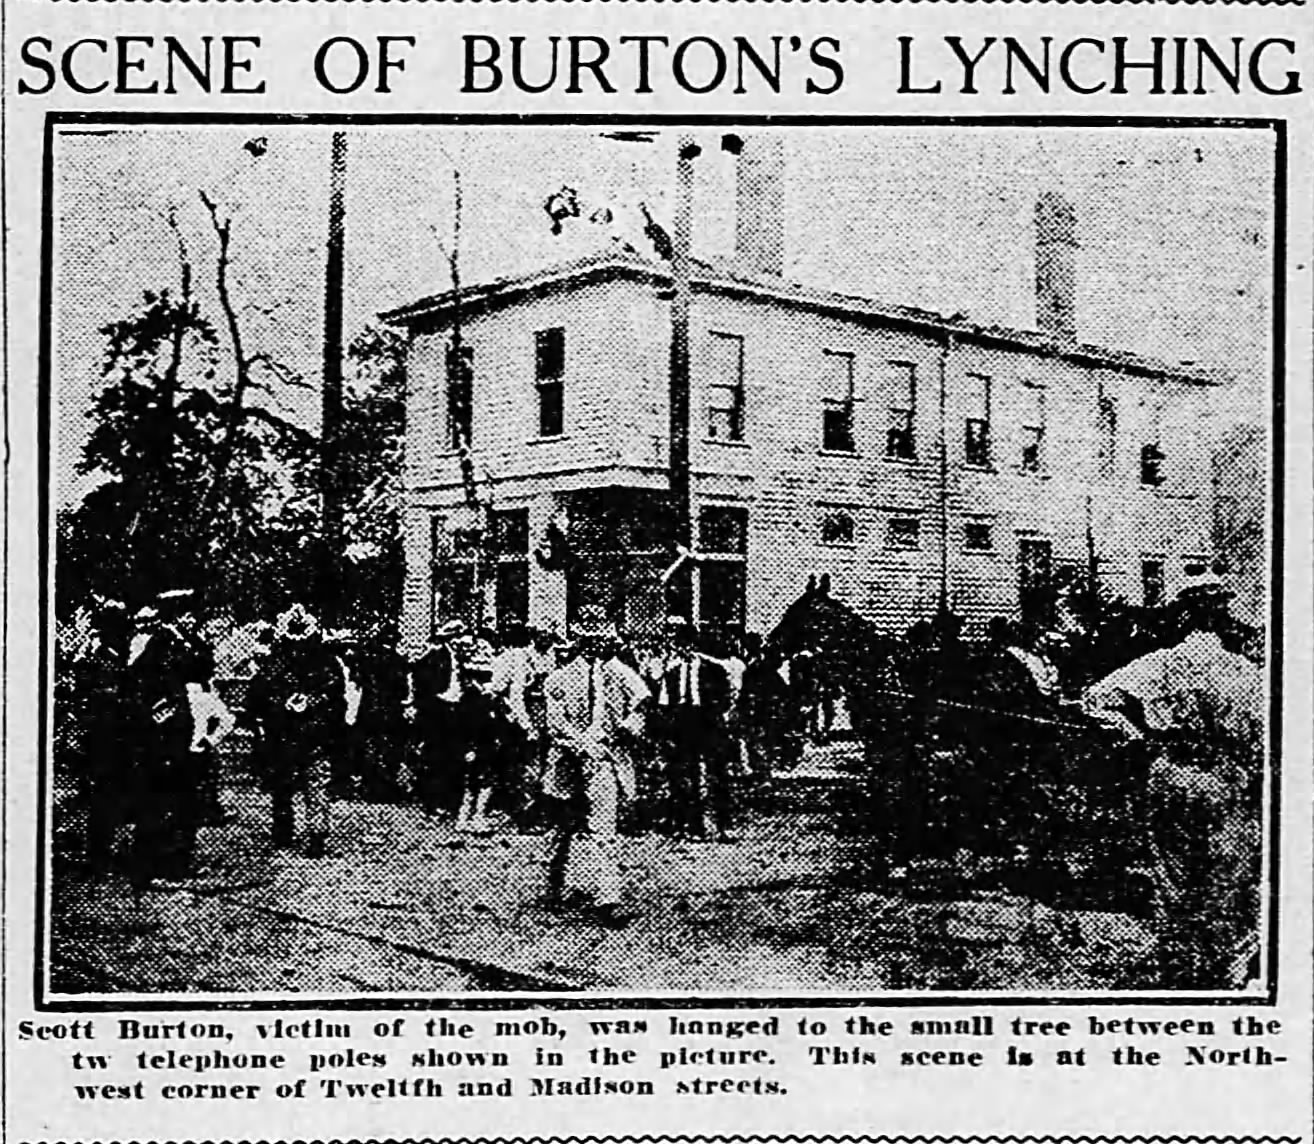 Image of the small tree where Burton was hung